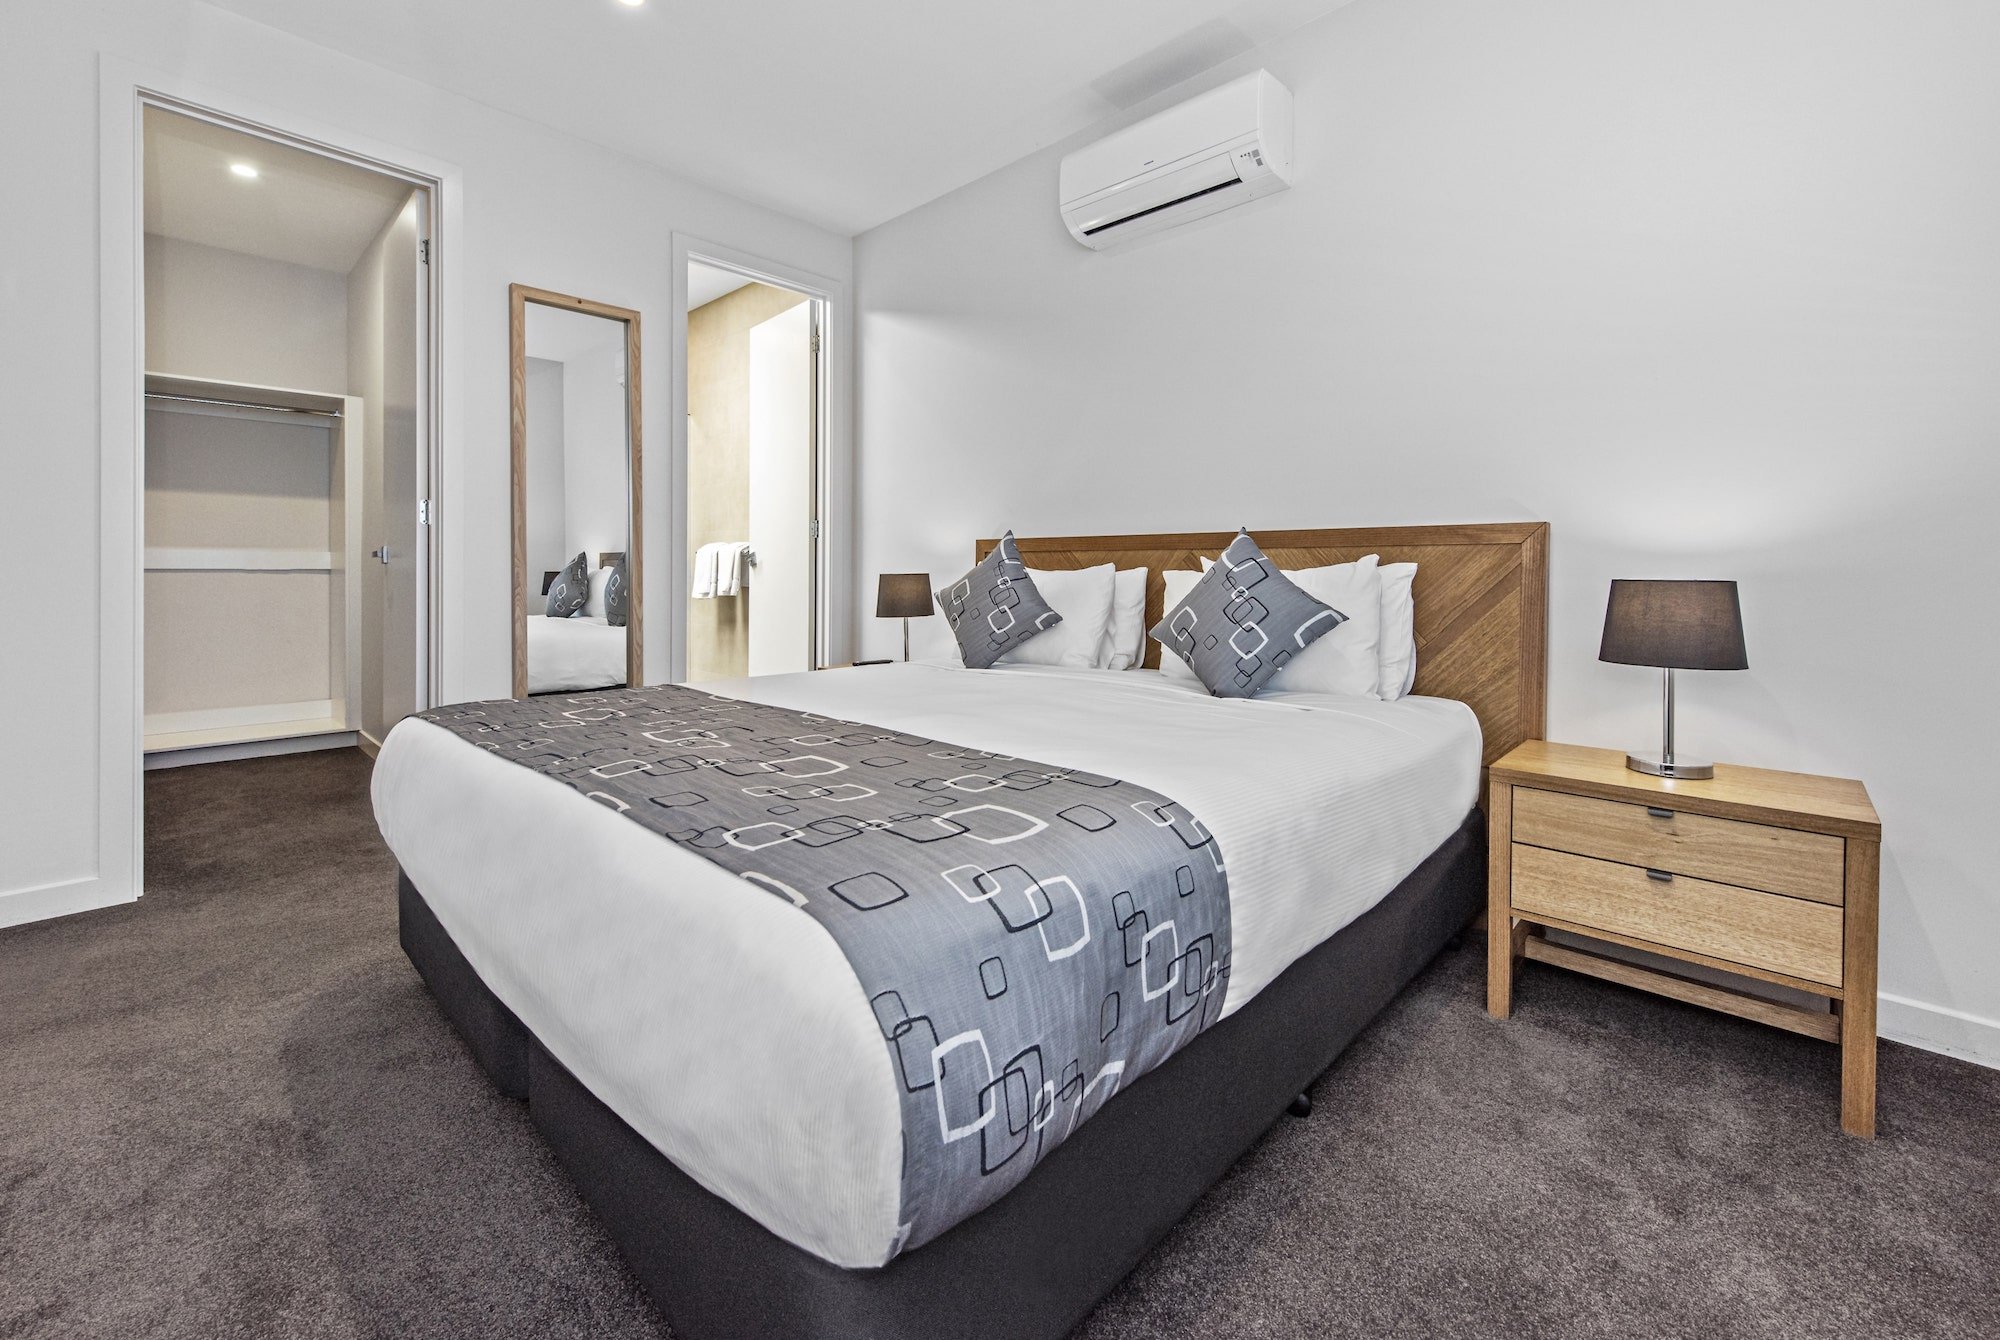 fawkner-executive-suites-and-serviced-apartments-accommodation-three-bedroom-townhouse-2.jpg